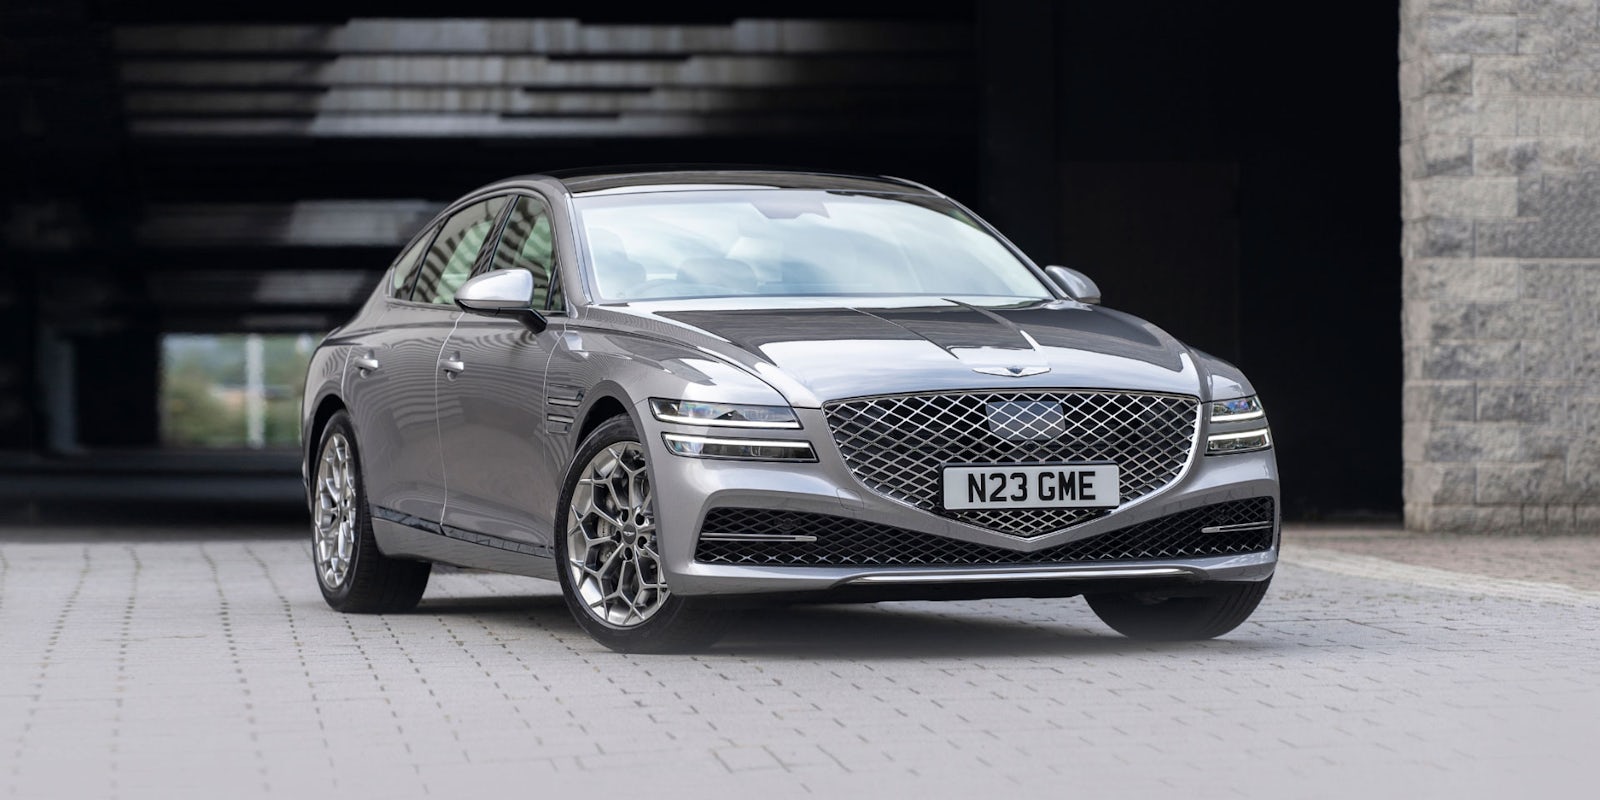 New Genesis G70 G80 Gv70 And Gv80 Coming To Uk Initial Prices Revealed Carwow